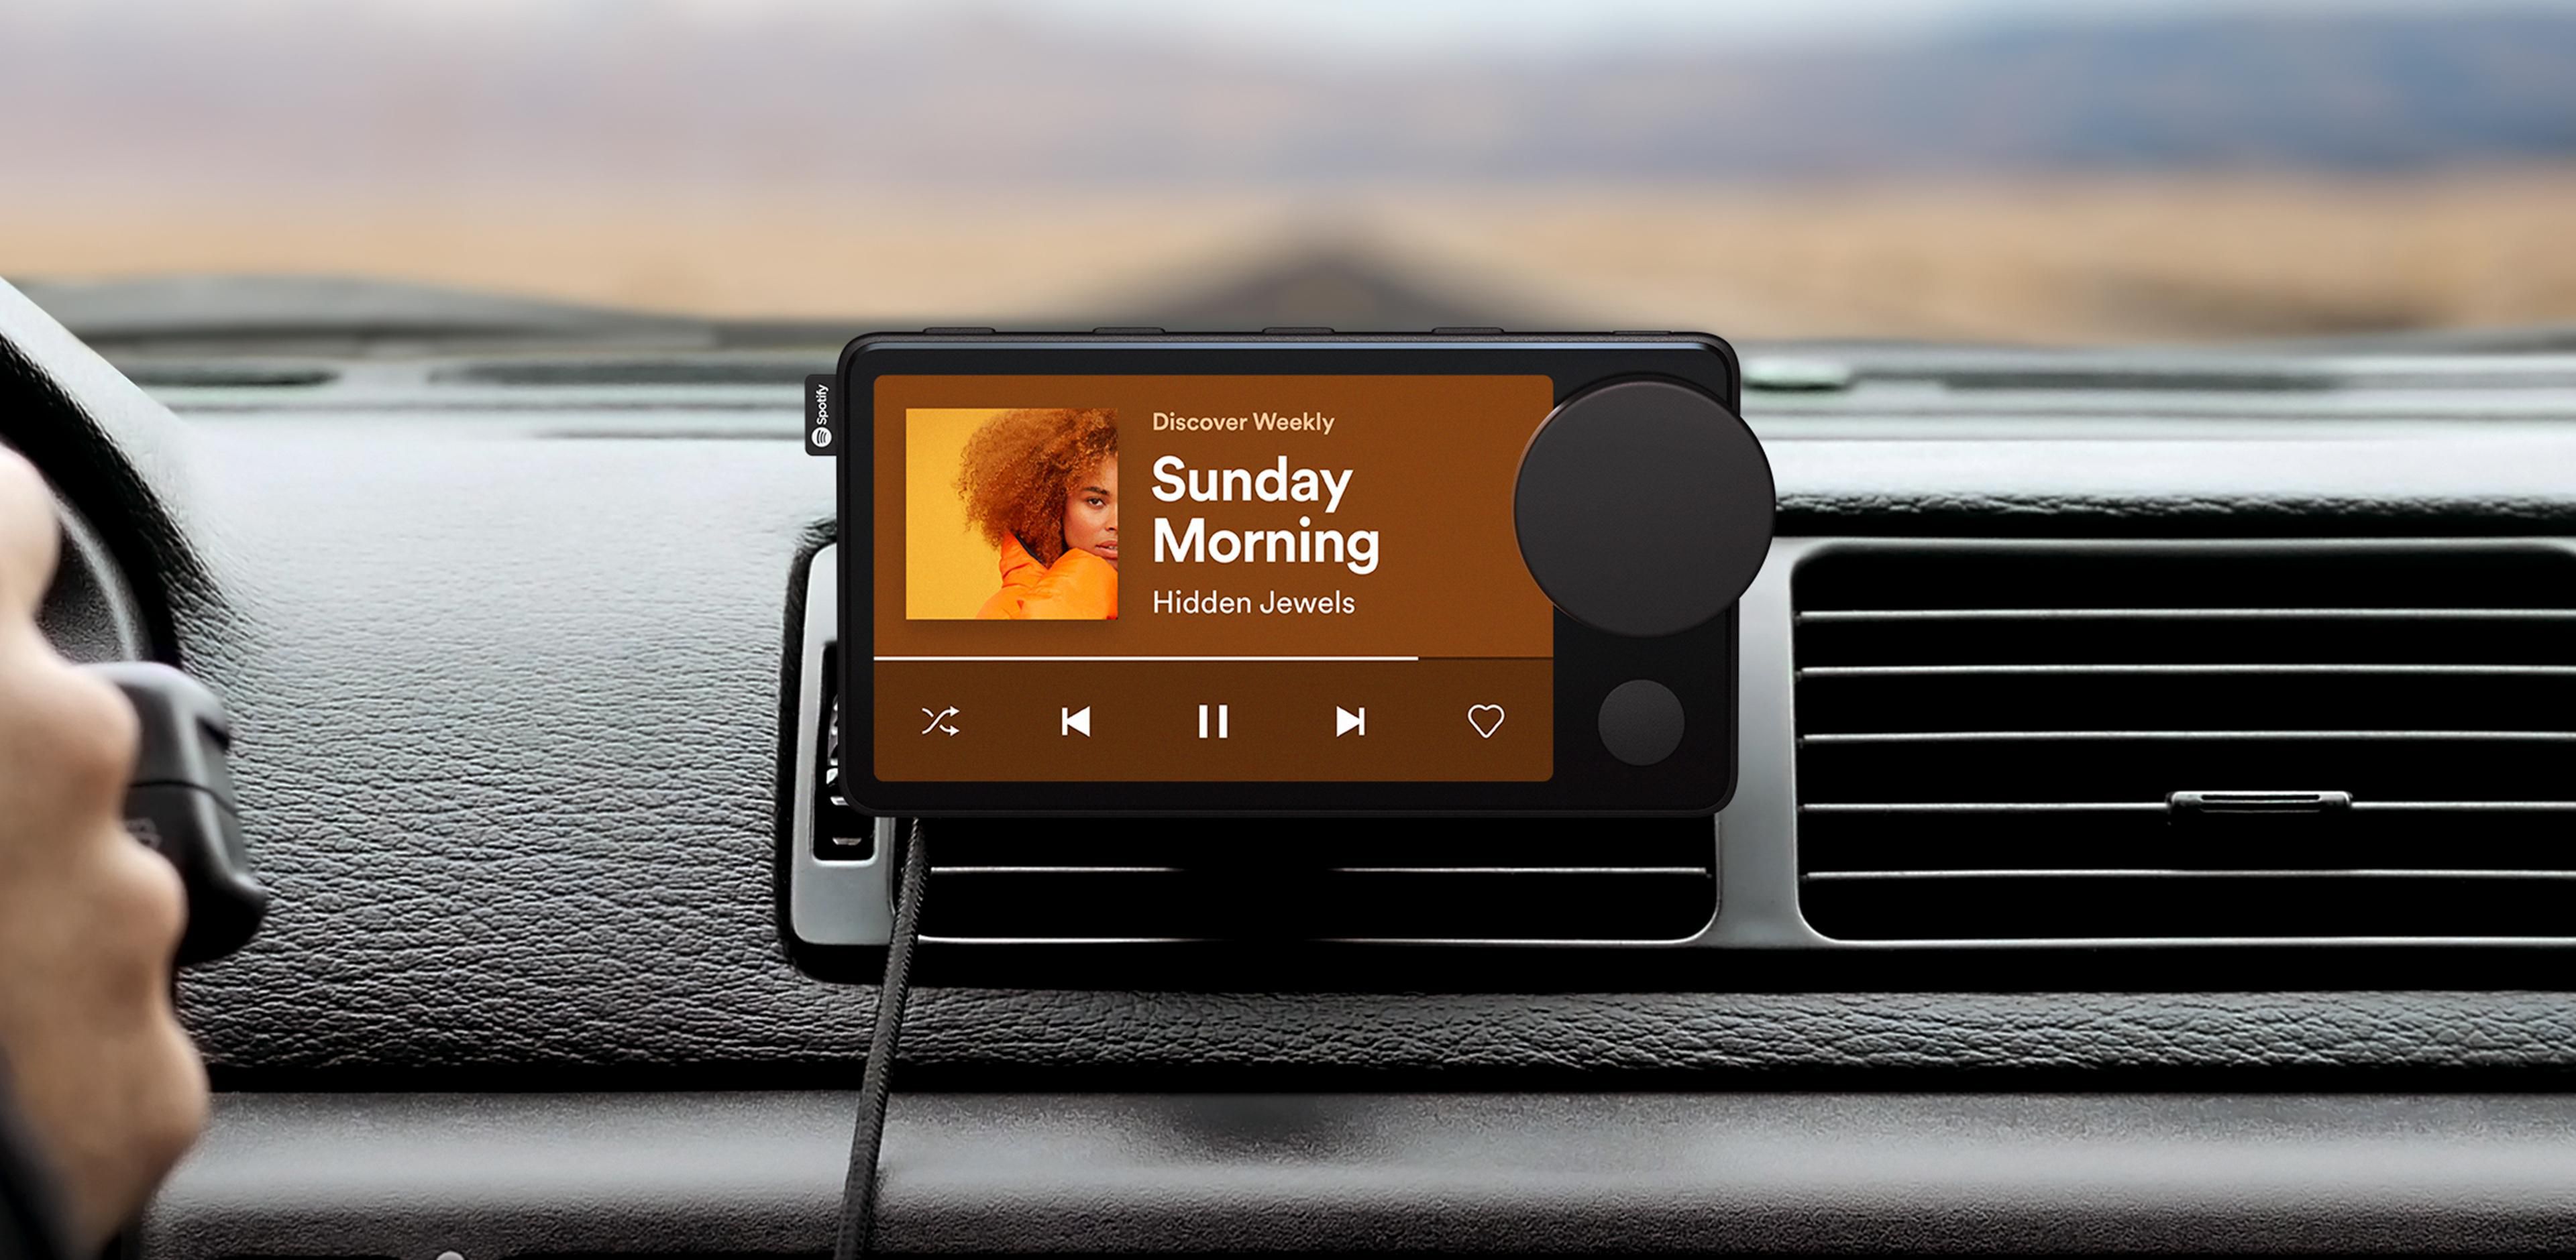 Spotify begins testing its first hardware: a car smart assistant - The Verge